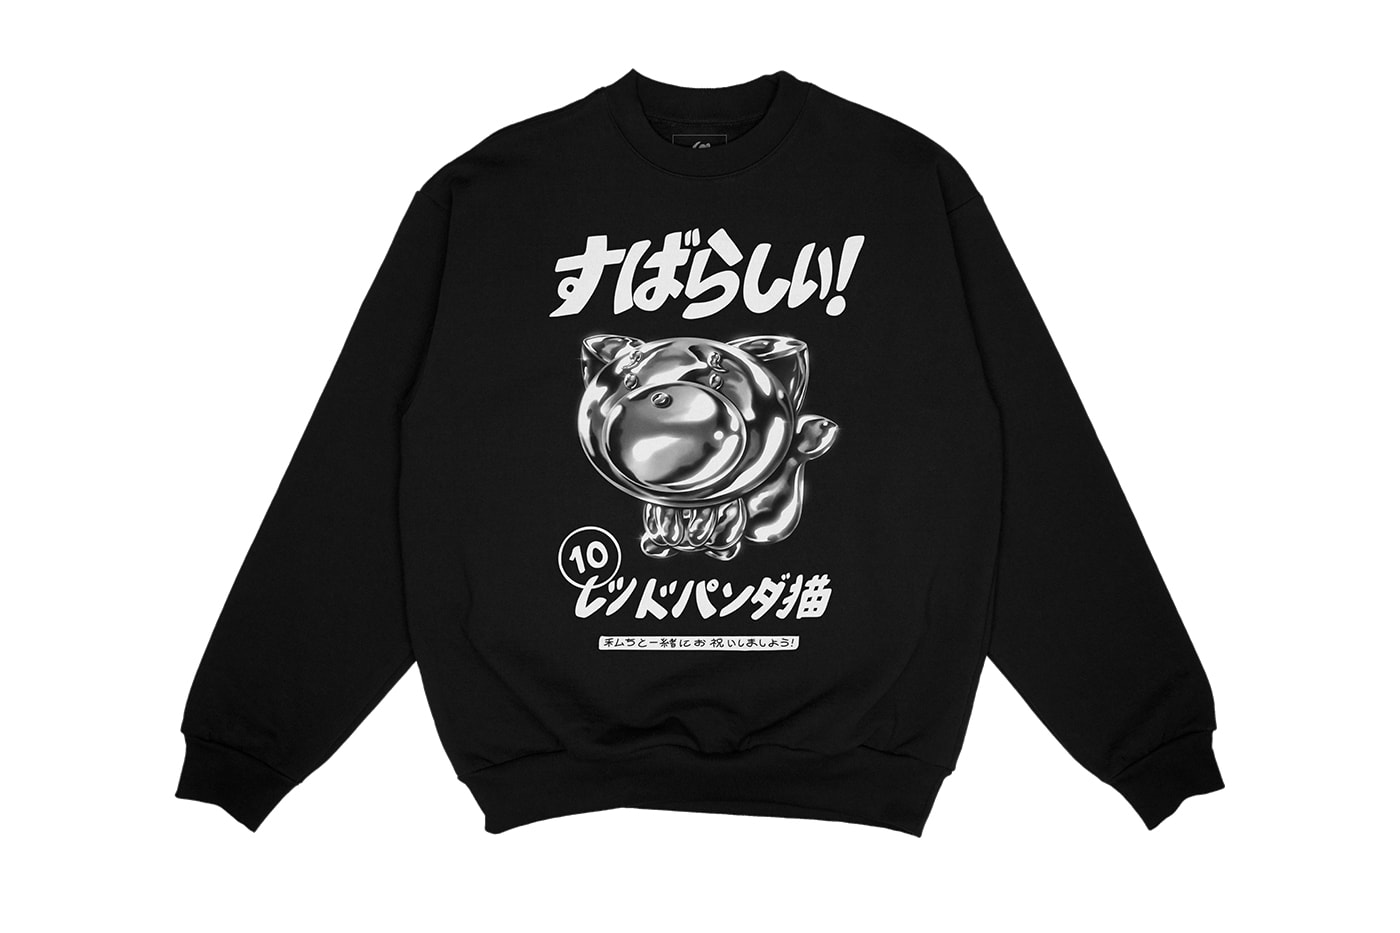 The Weeknd Celebrates 10 Years of 'Kiss Land' With New Merch Drop abel tesfaye roots superplastic